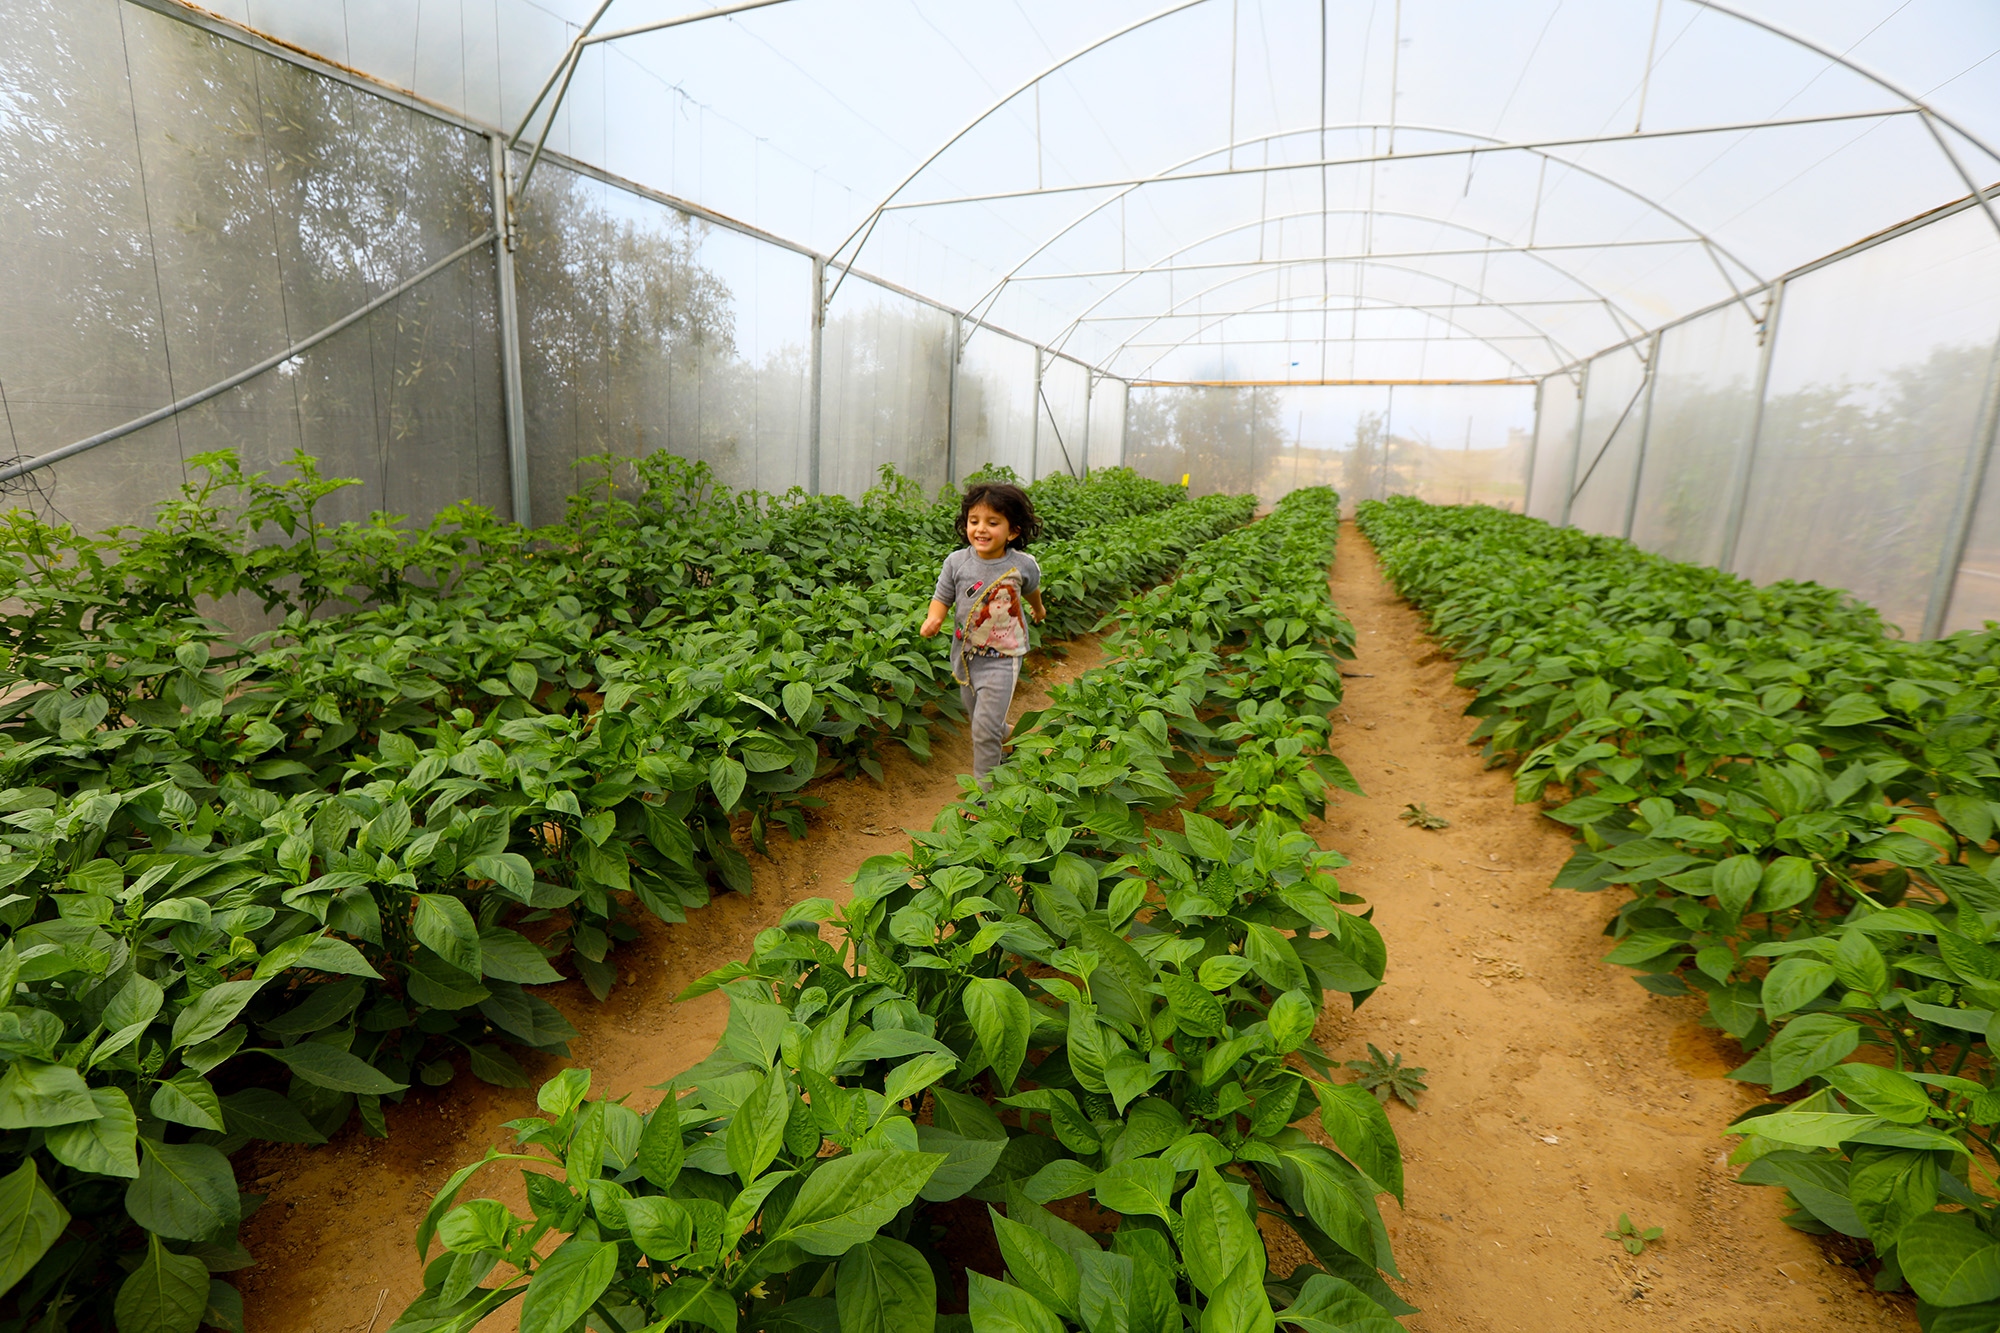 Ahlam, named after her grandmother, runs through the family greenhouse.